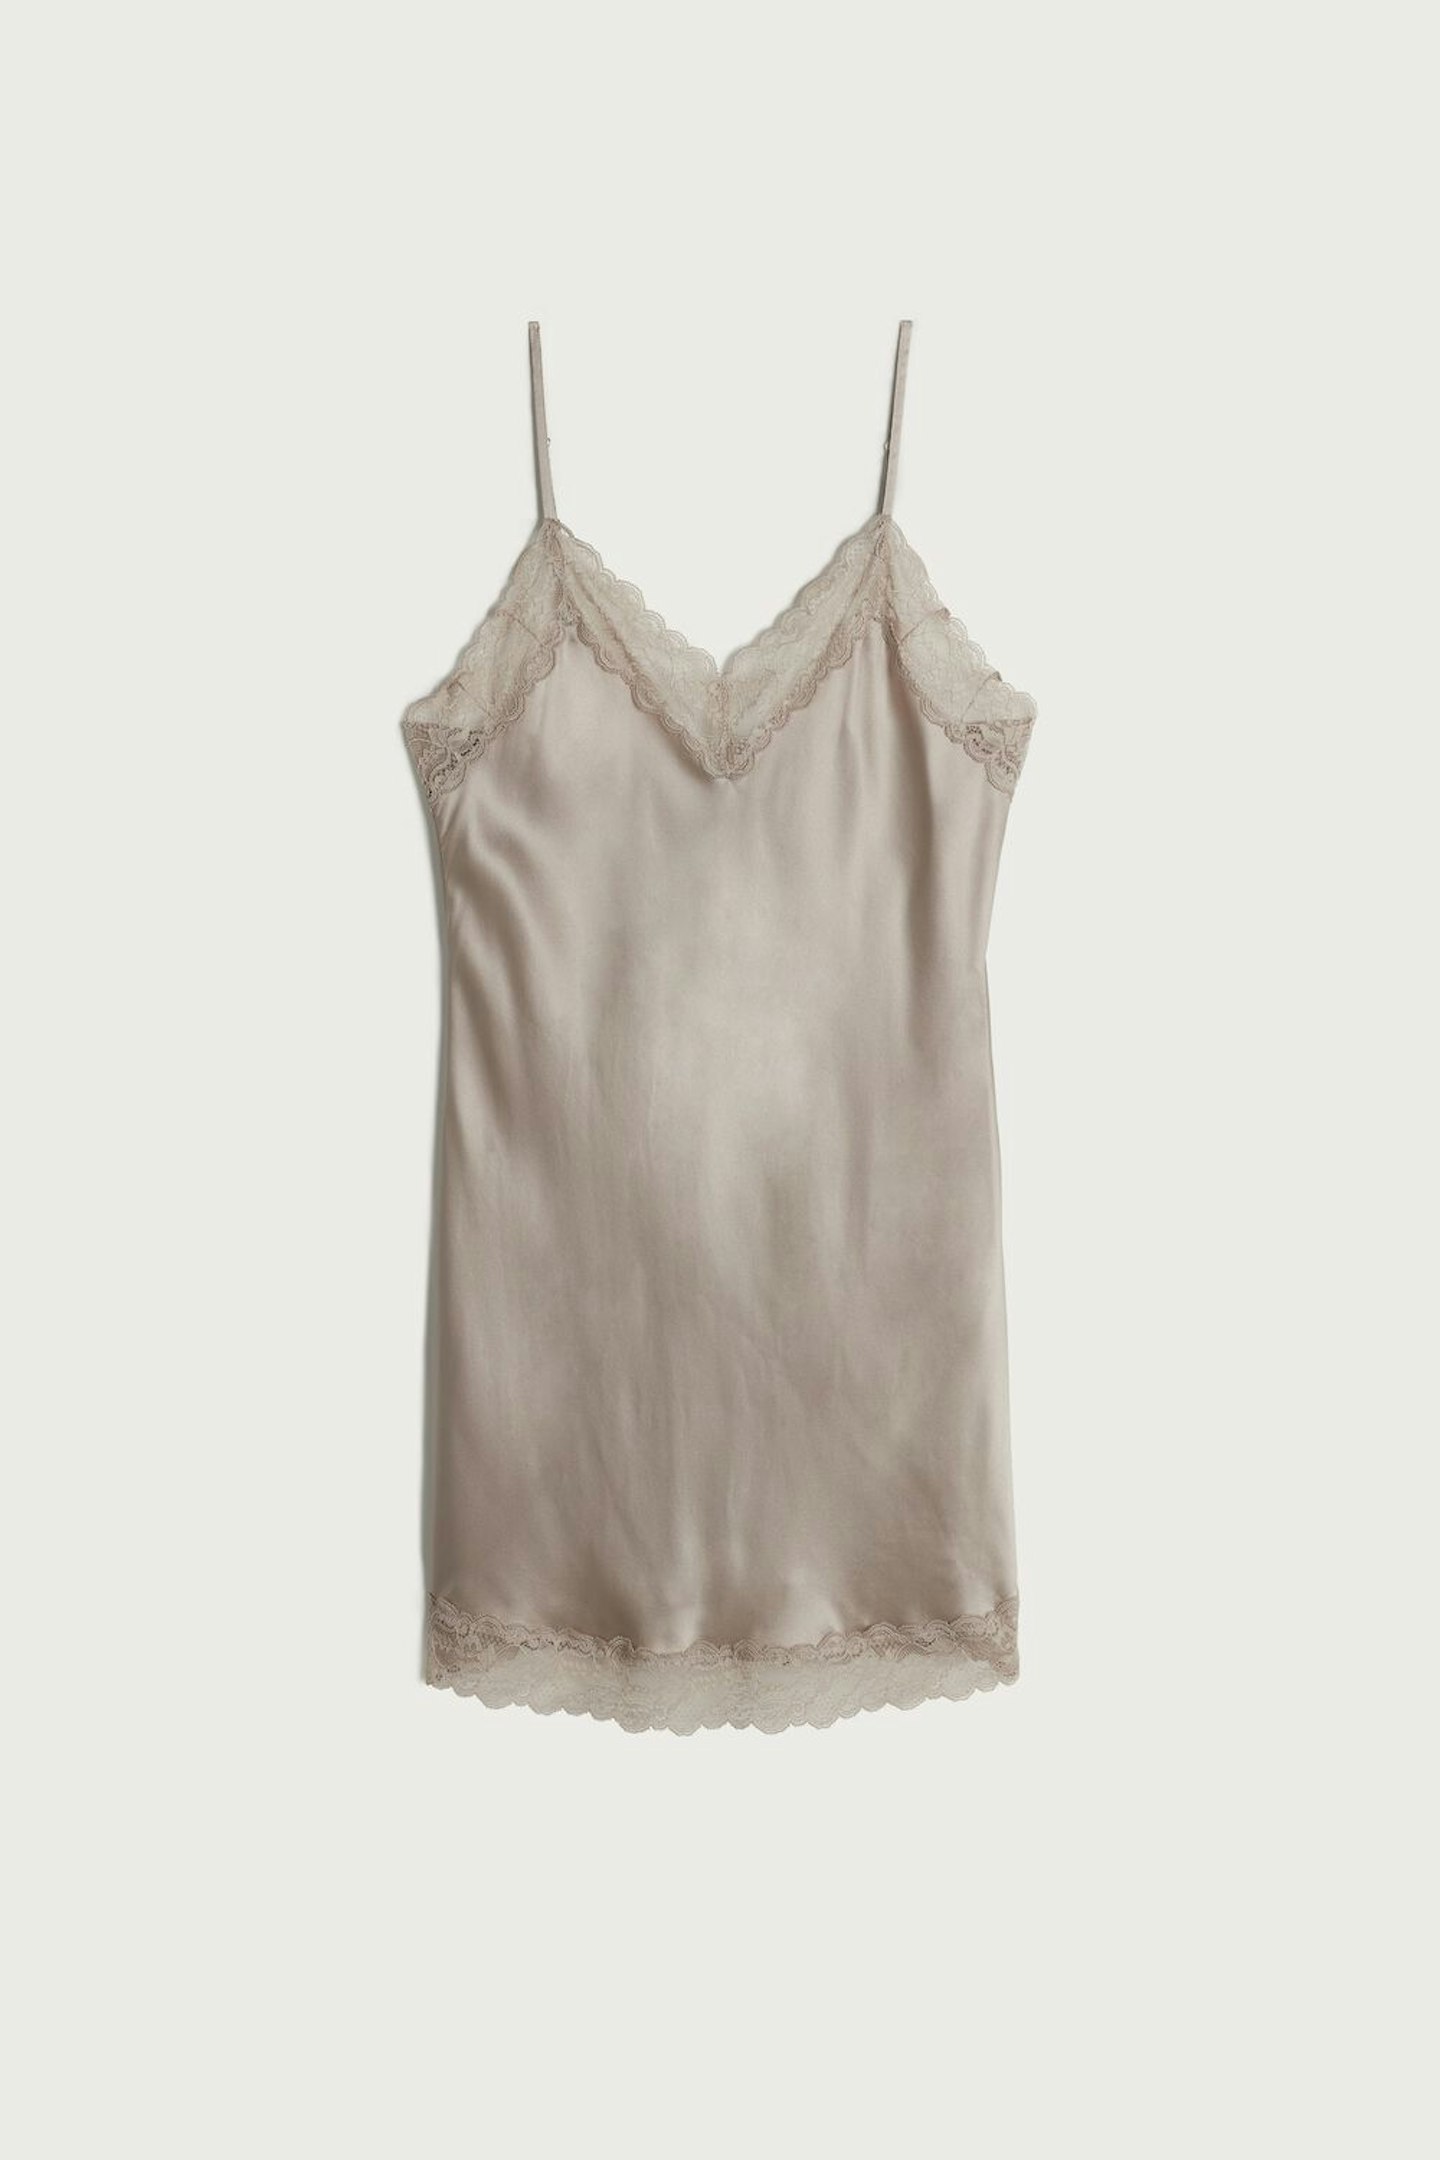 Intimissimi Silk Slip With Lace Detail